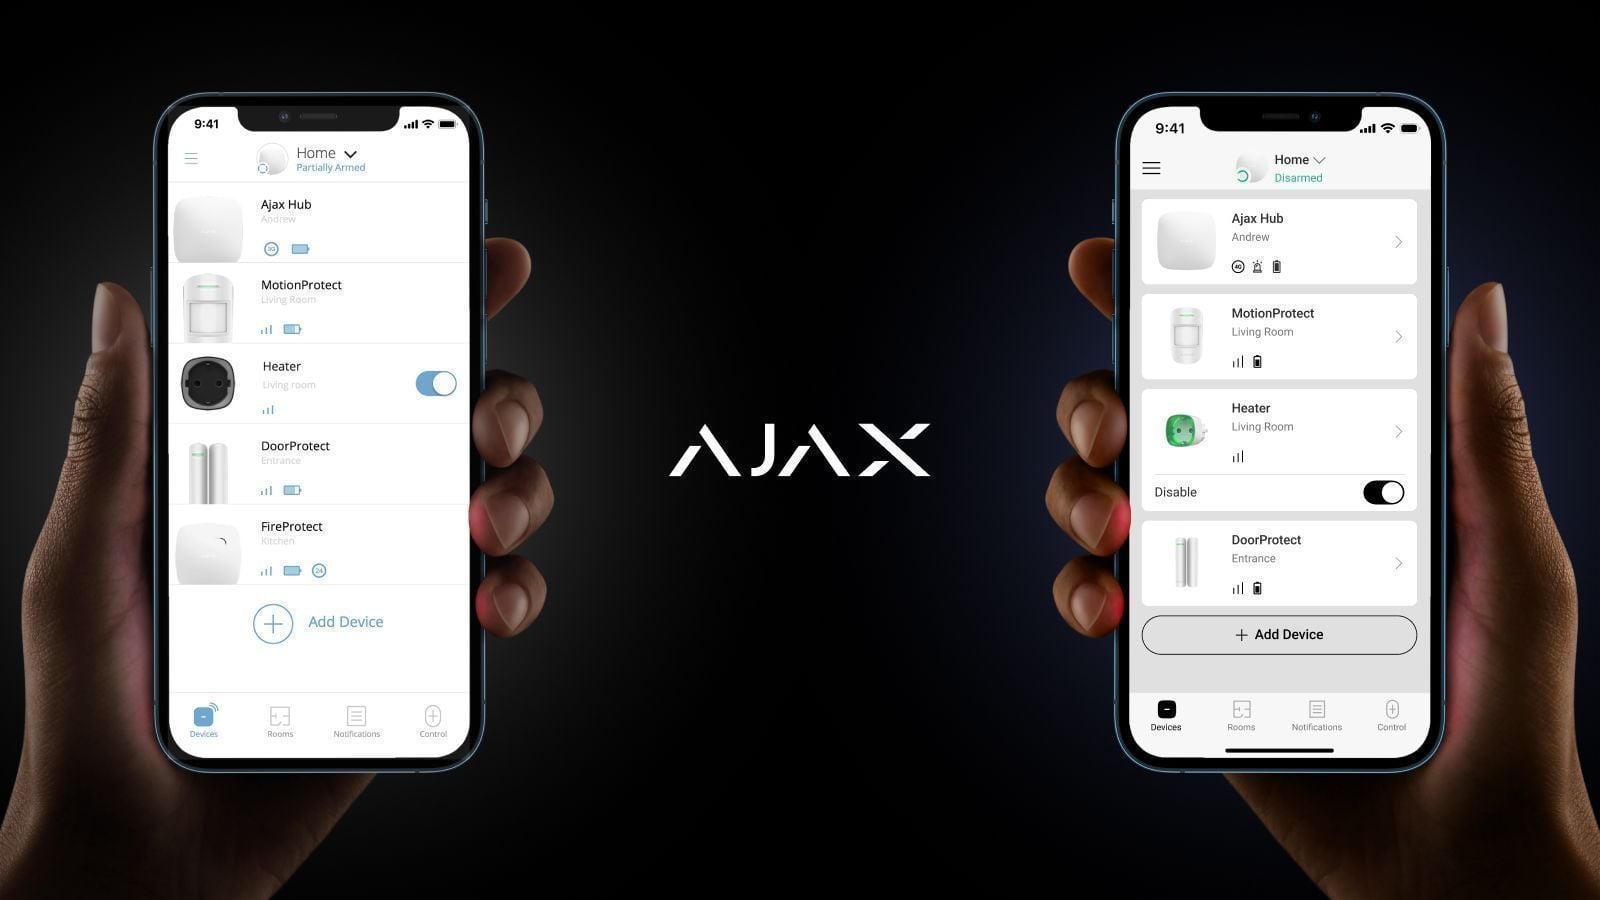 Redesigned Ajax apps for your comfort